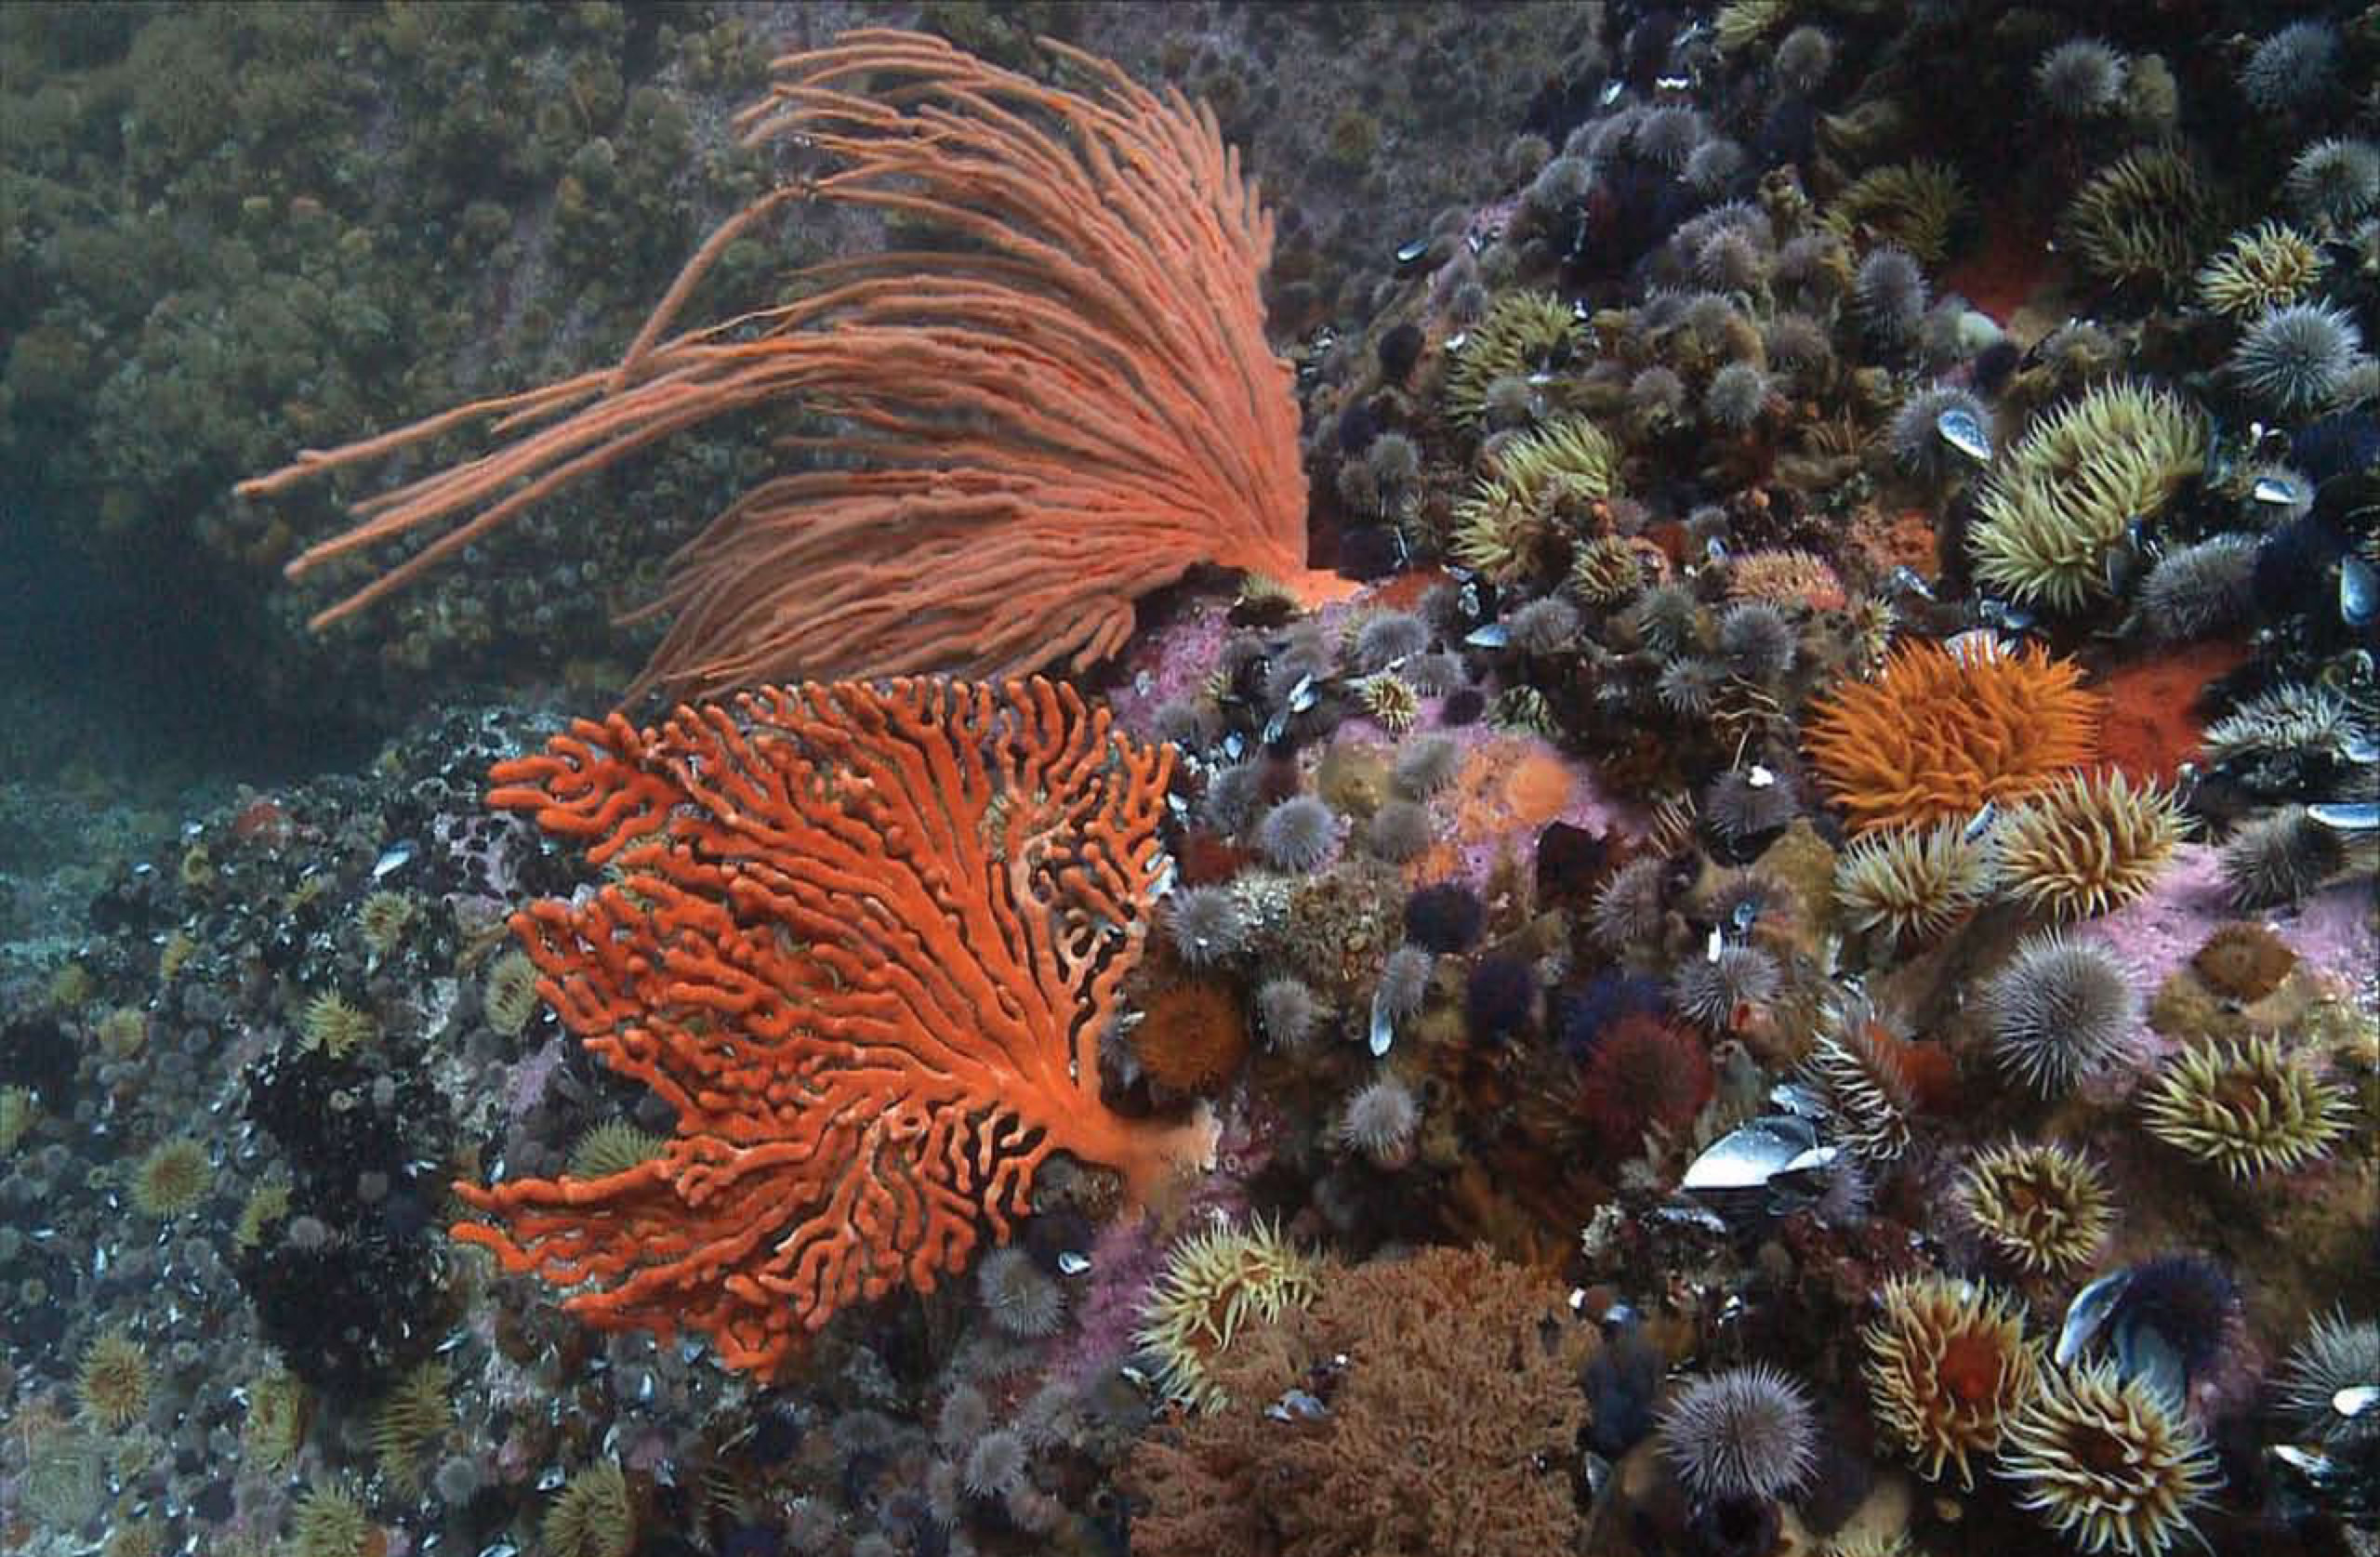 False Bay, while lacking in colourful fish, supports a large and colourful reef community. 